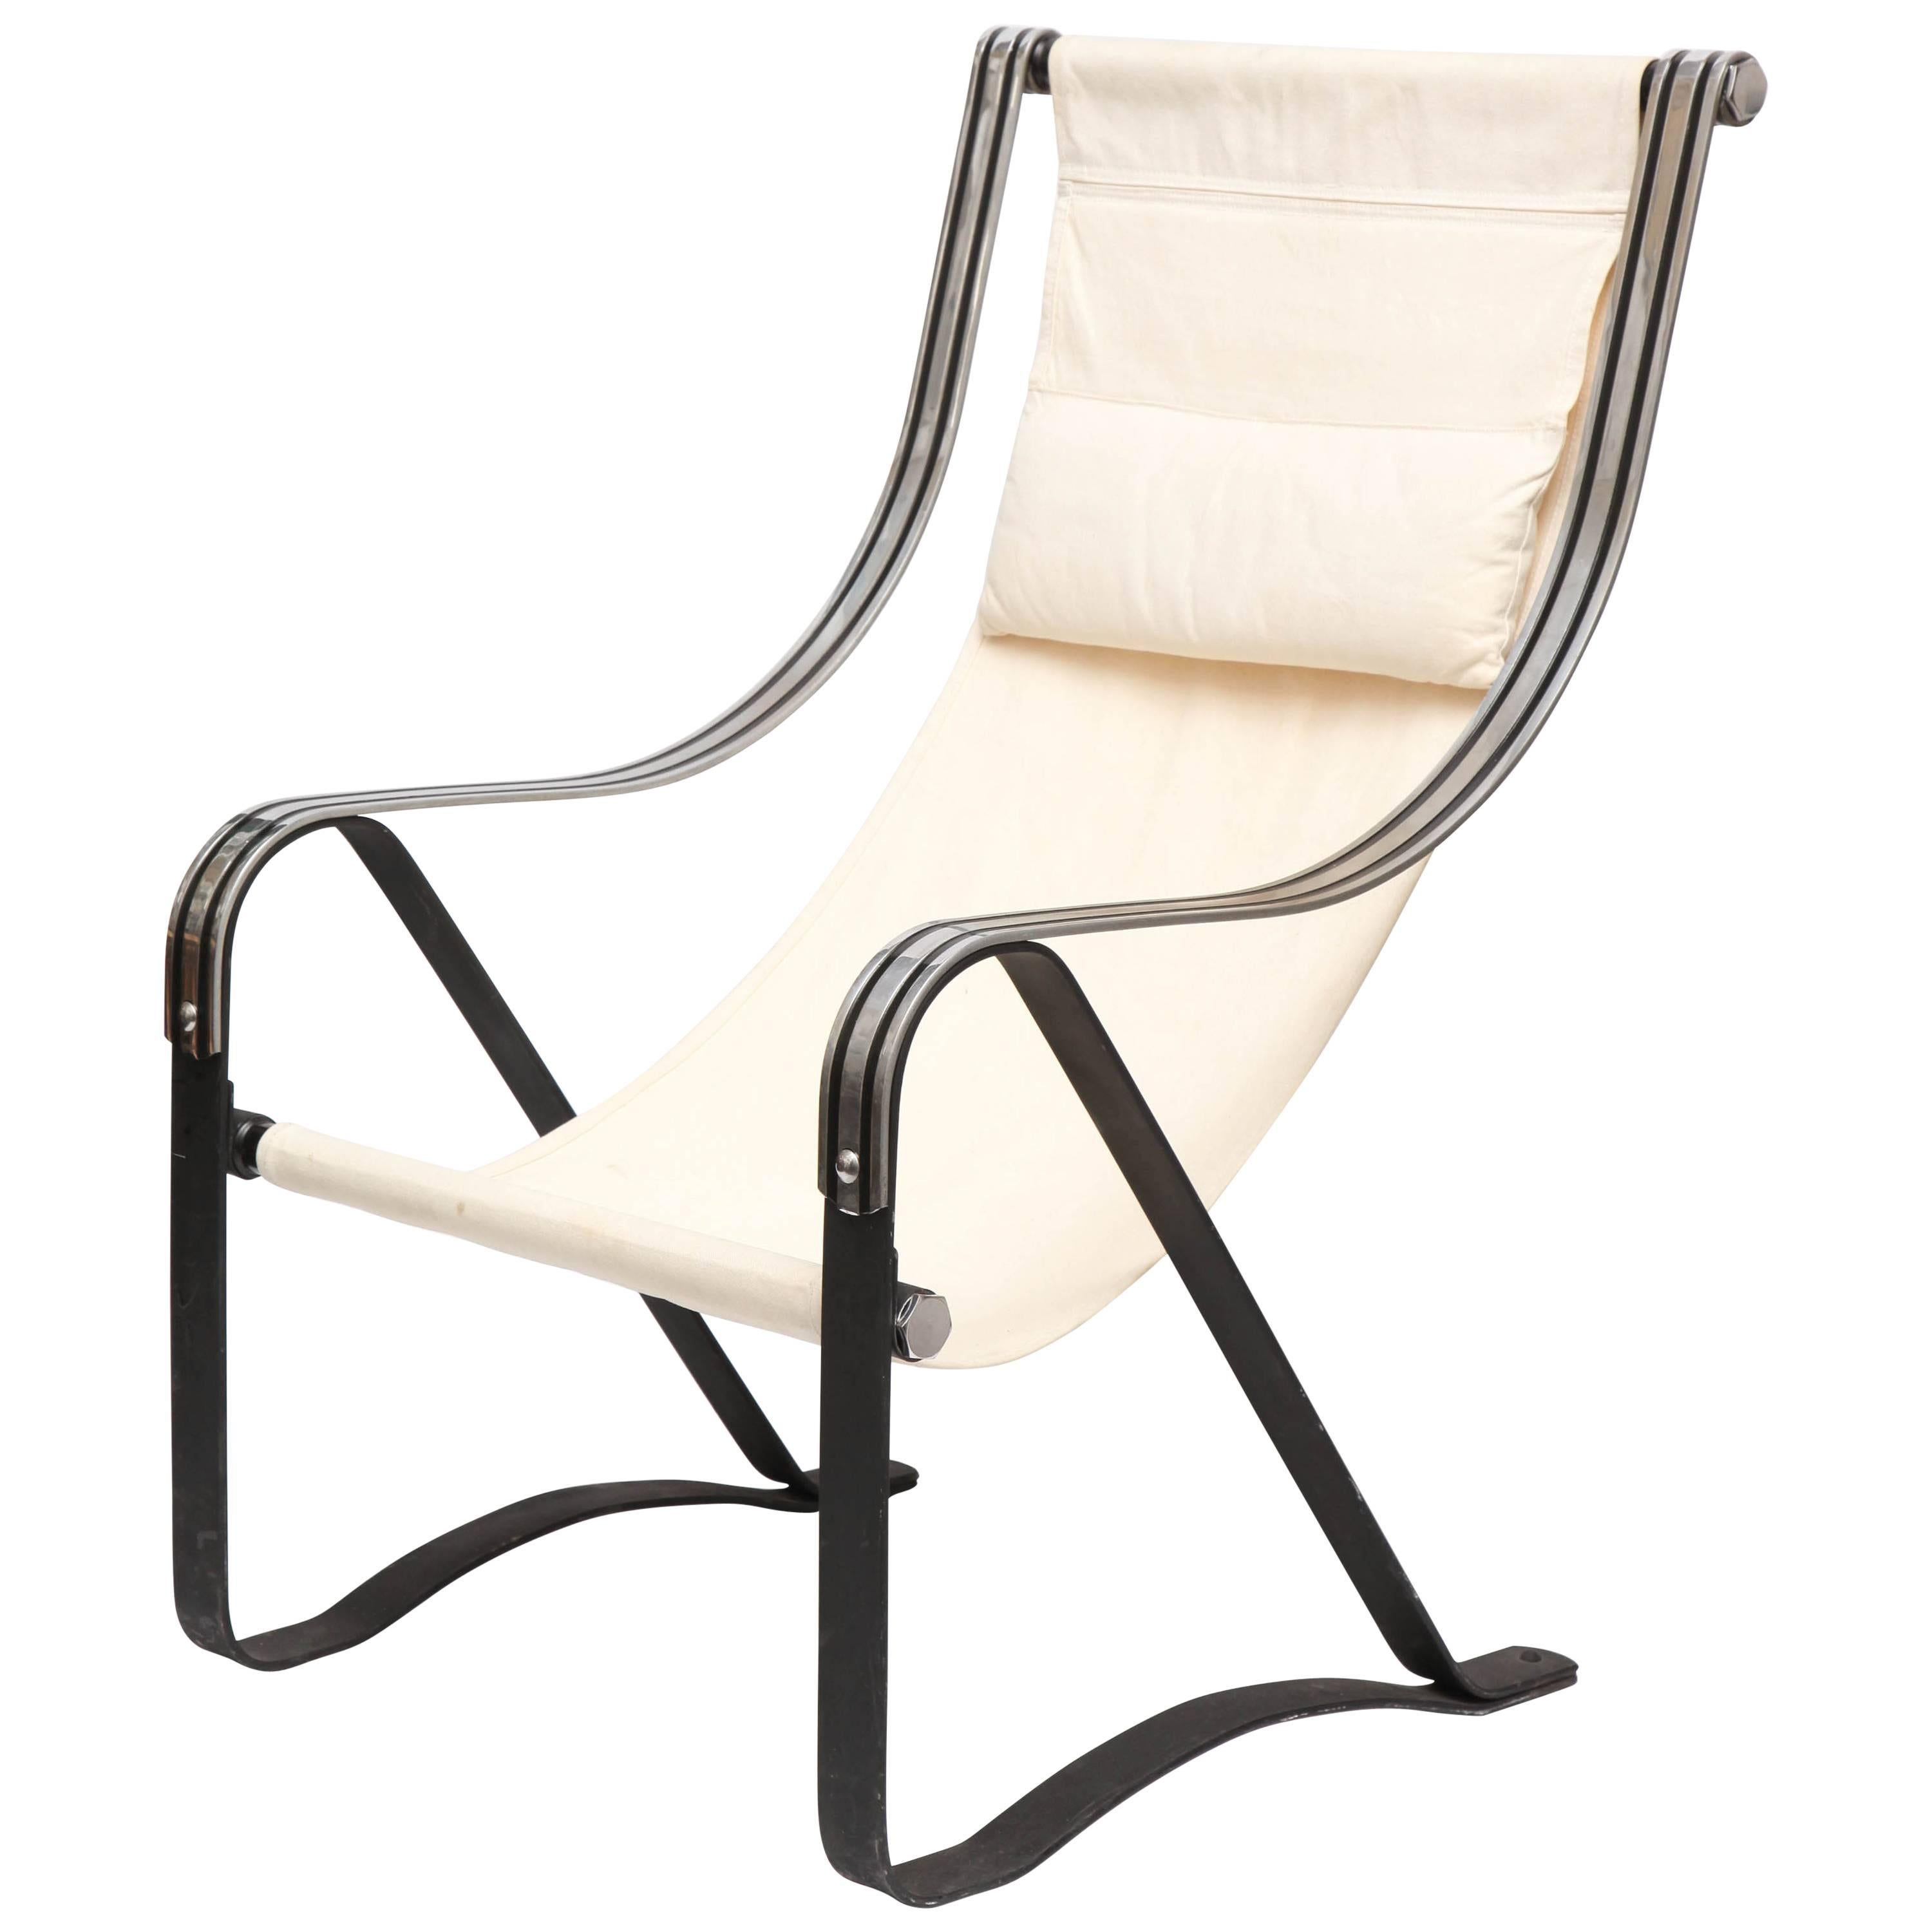 1930s American Modernist Chair by Mc Kay